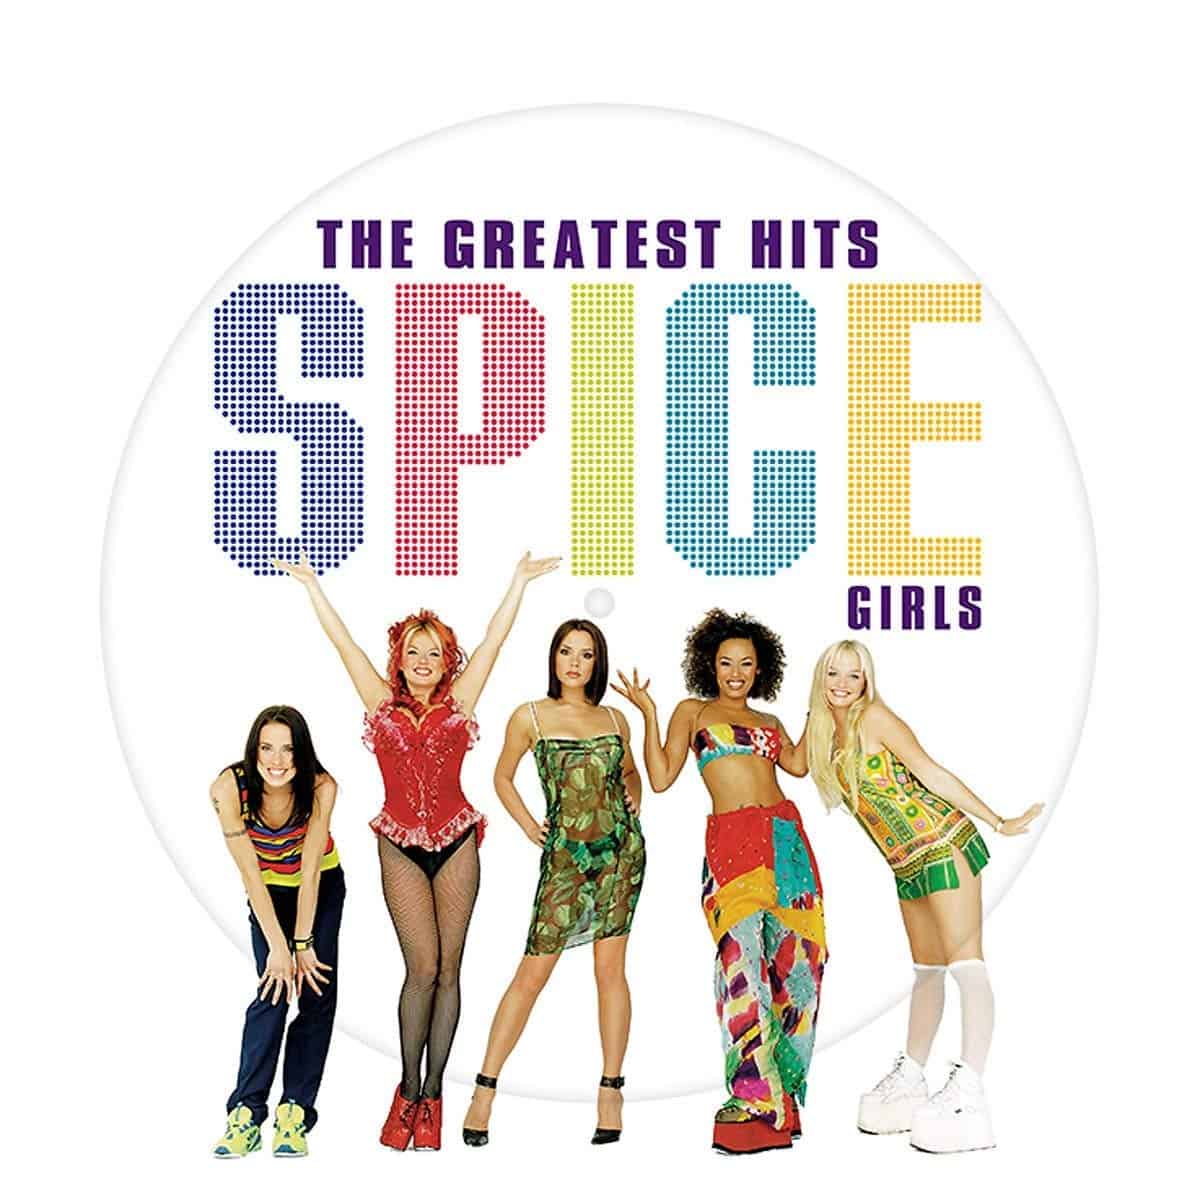 Spice-Girls-Greatest-Hits-Picture-Disc-vinyl-LP-record-album-front